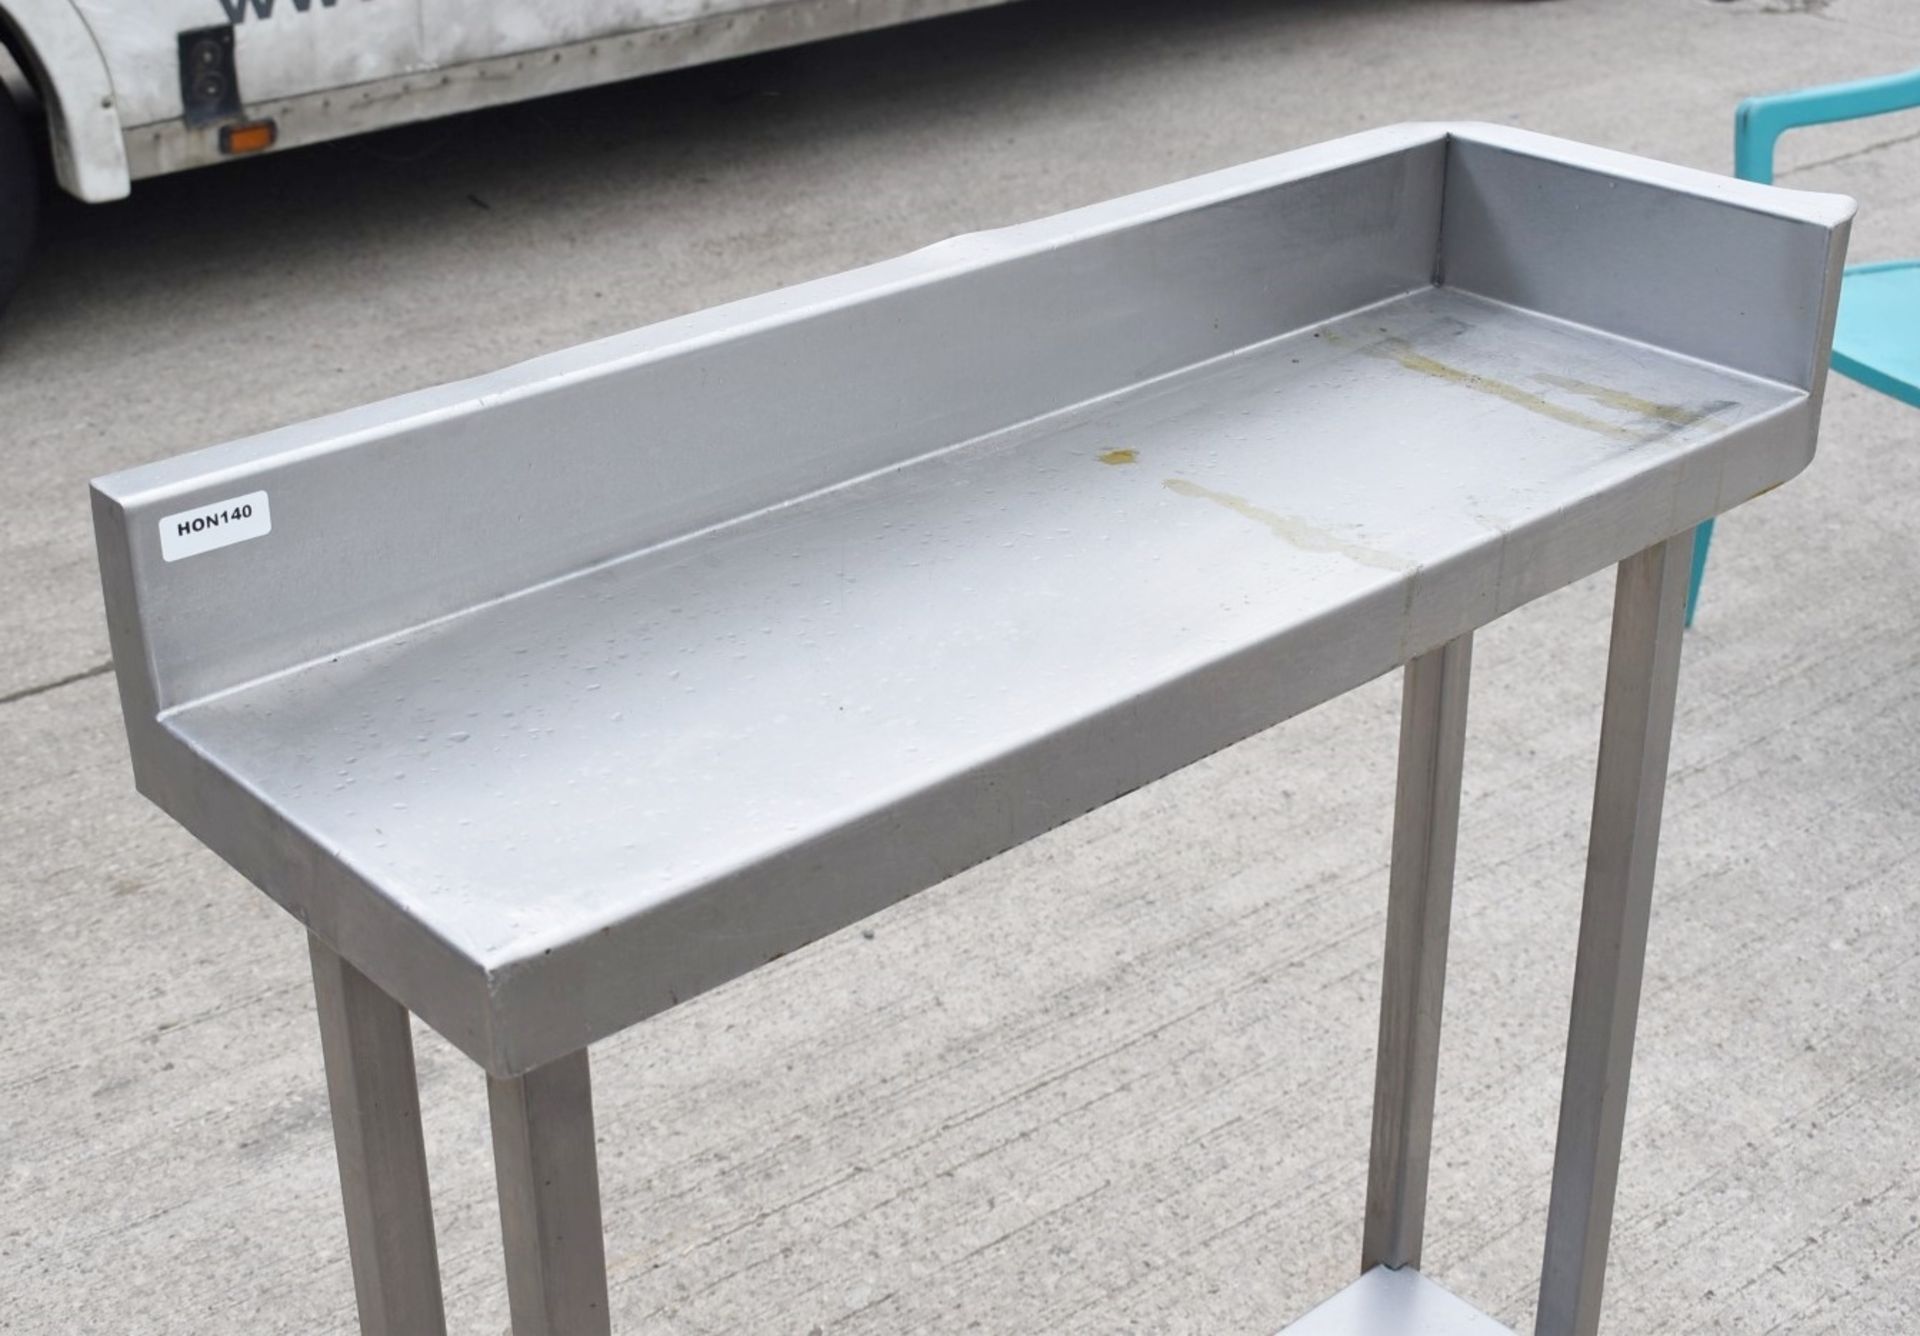 1 x Stainless Steel Corner Infill Prep Bench - Dimensions: H91 x W30 x D90 cms - CL740 - Ref: HON140 - Image 2 of 4